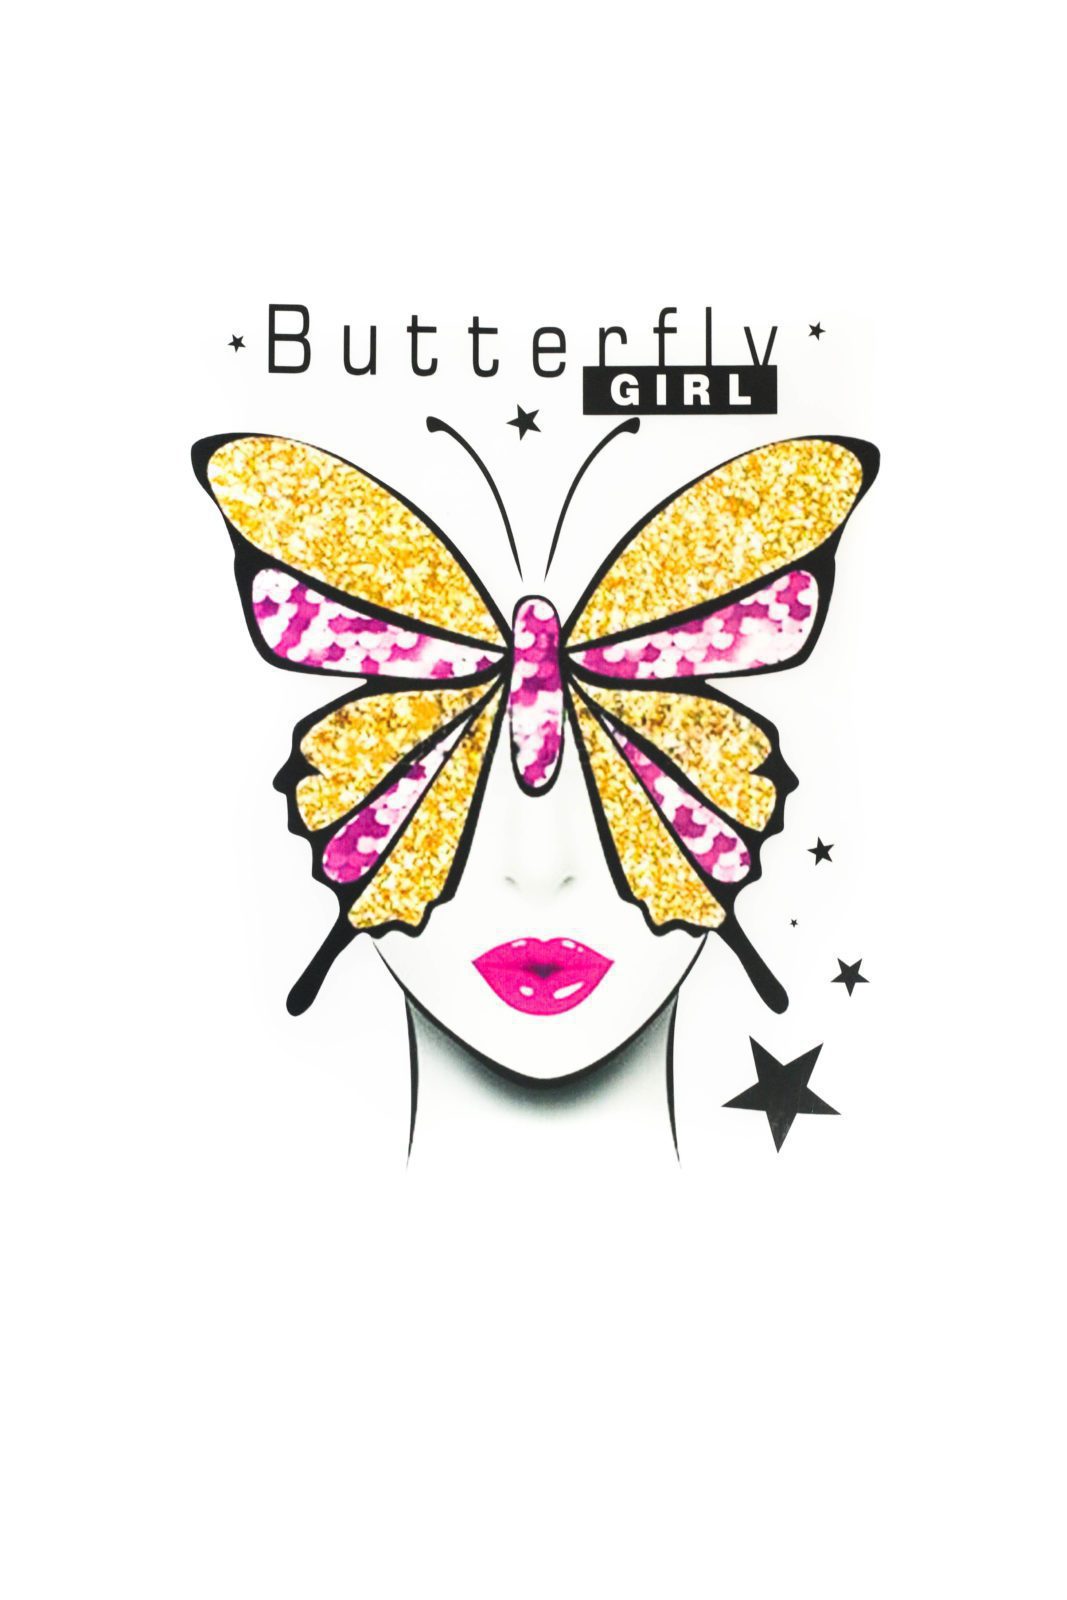 Butterfly girl Iron on Heat transfer patches